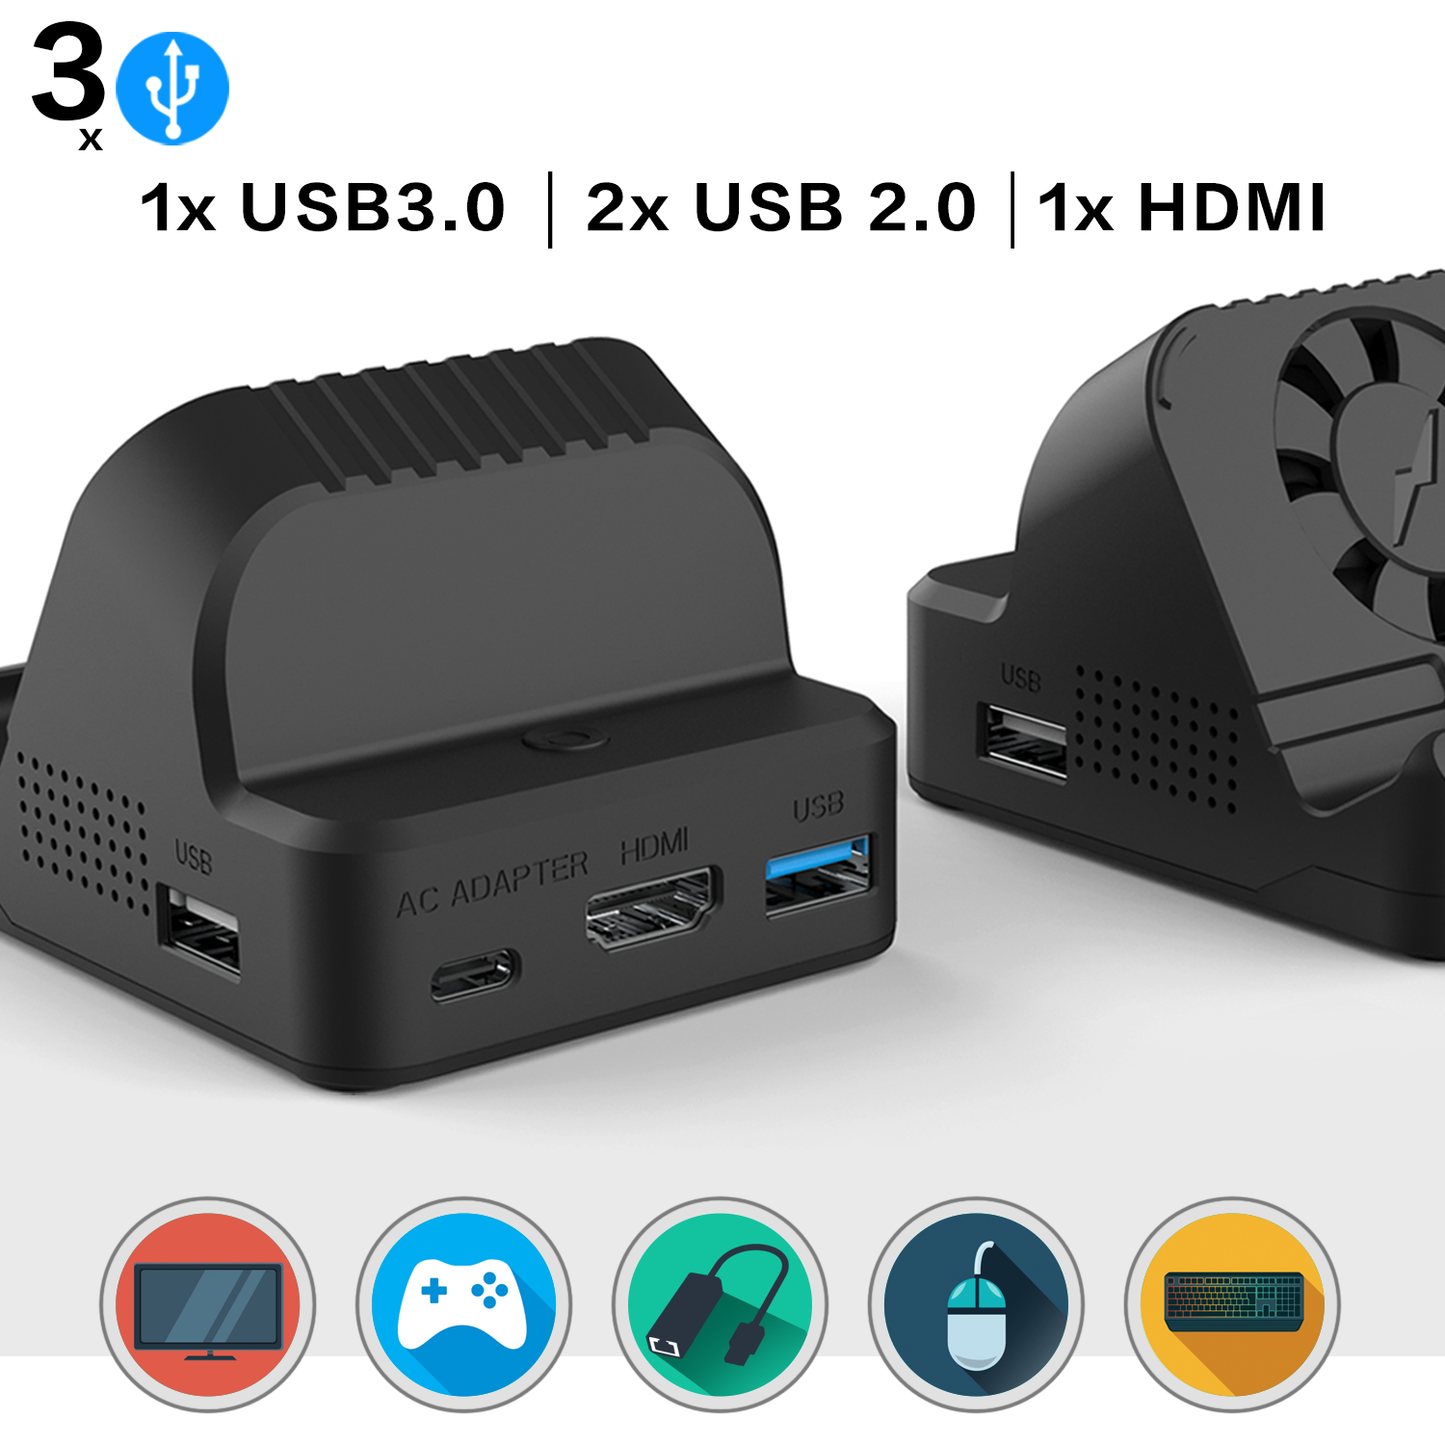 Switch Dock for Nintendo, TV Switch Docking Station Portable Switch Charging Dock for Nintendo Switch with 4K HDMI USB 3.0 Port and Cooling Fan 2021 Upgraded Version (Black)